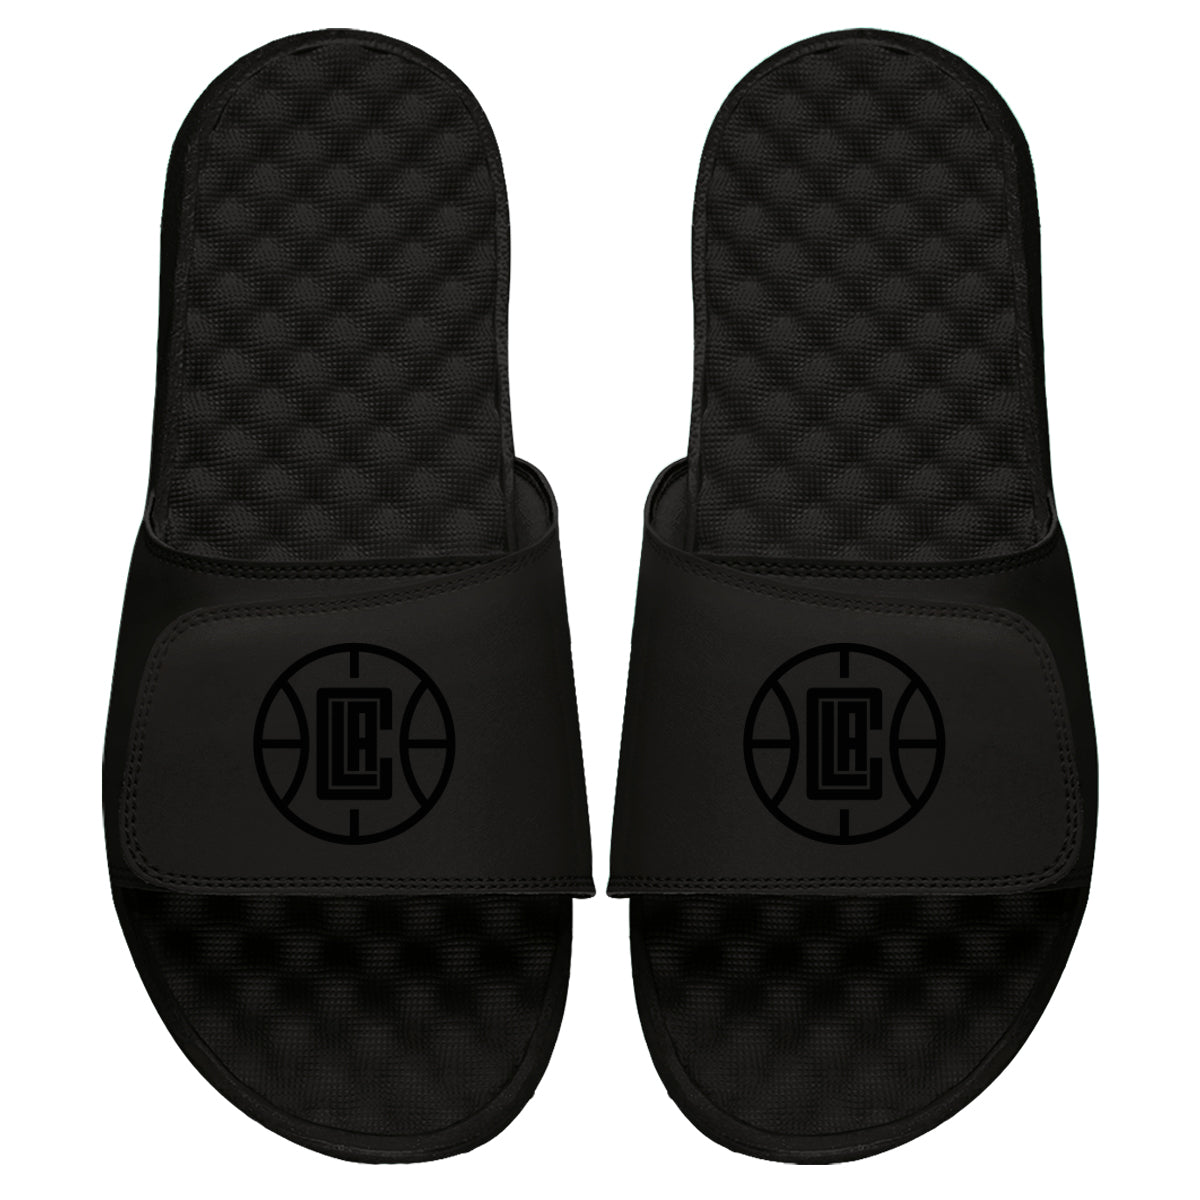 Los Angeles Clippers Blackout Slides